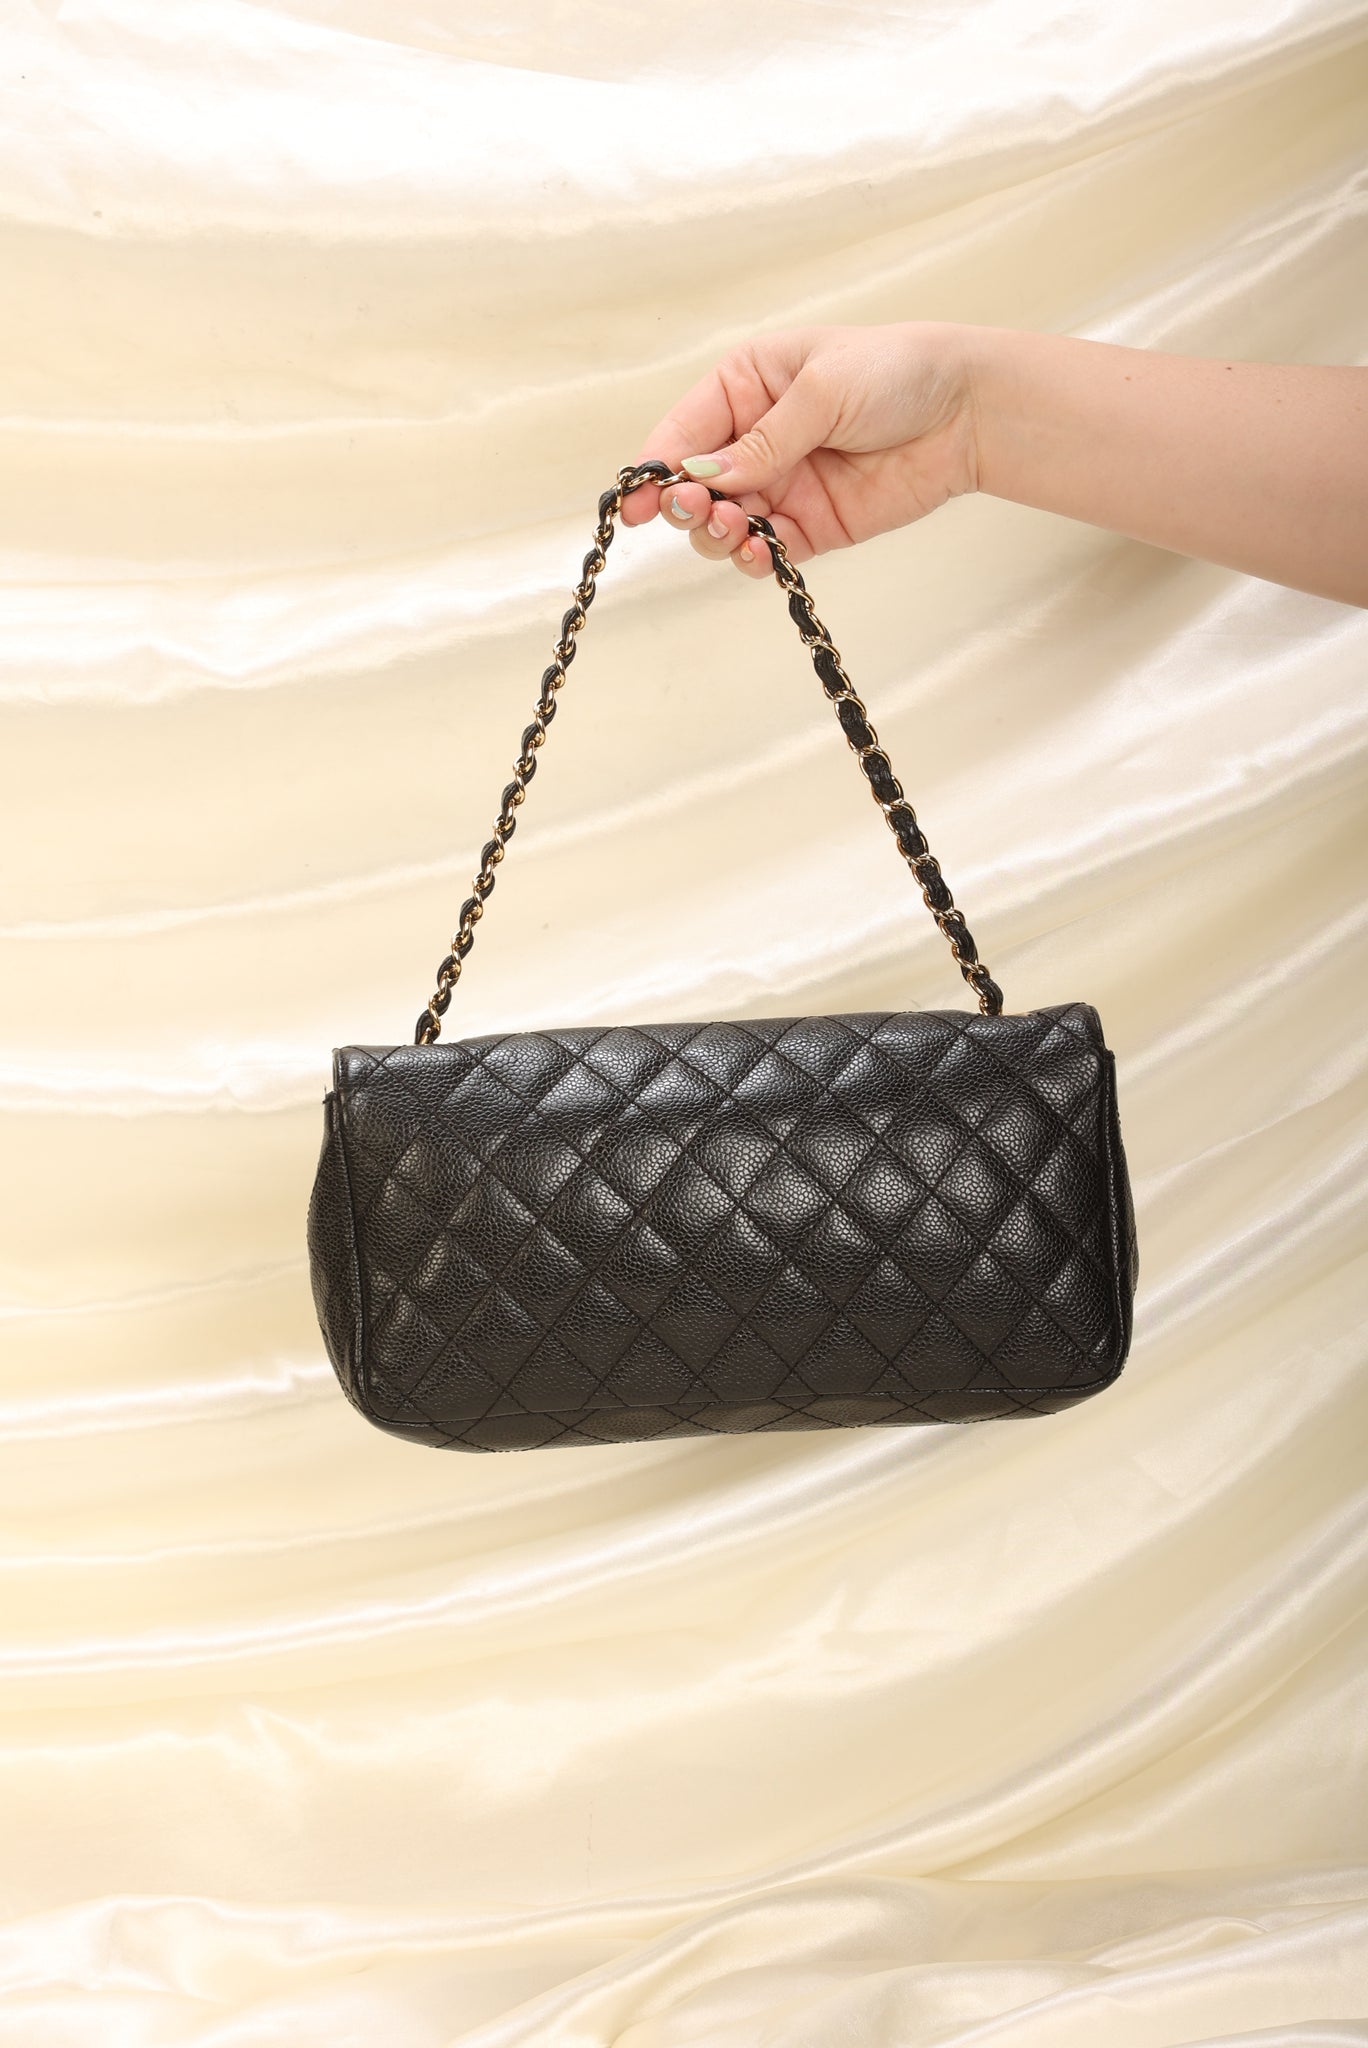 Chanel 2005-2006 Quilted Lambskin Tote Bag